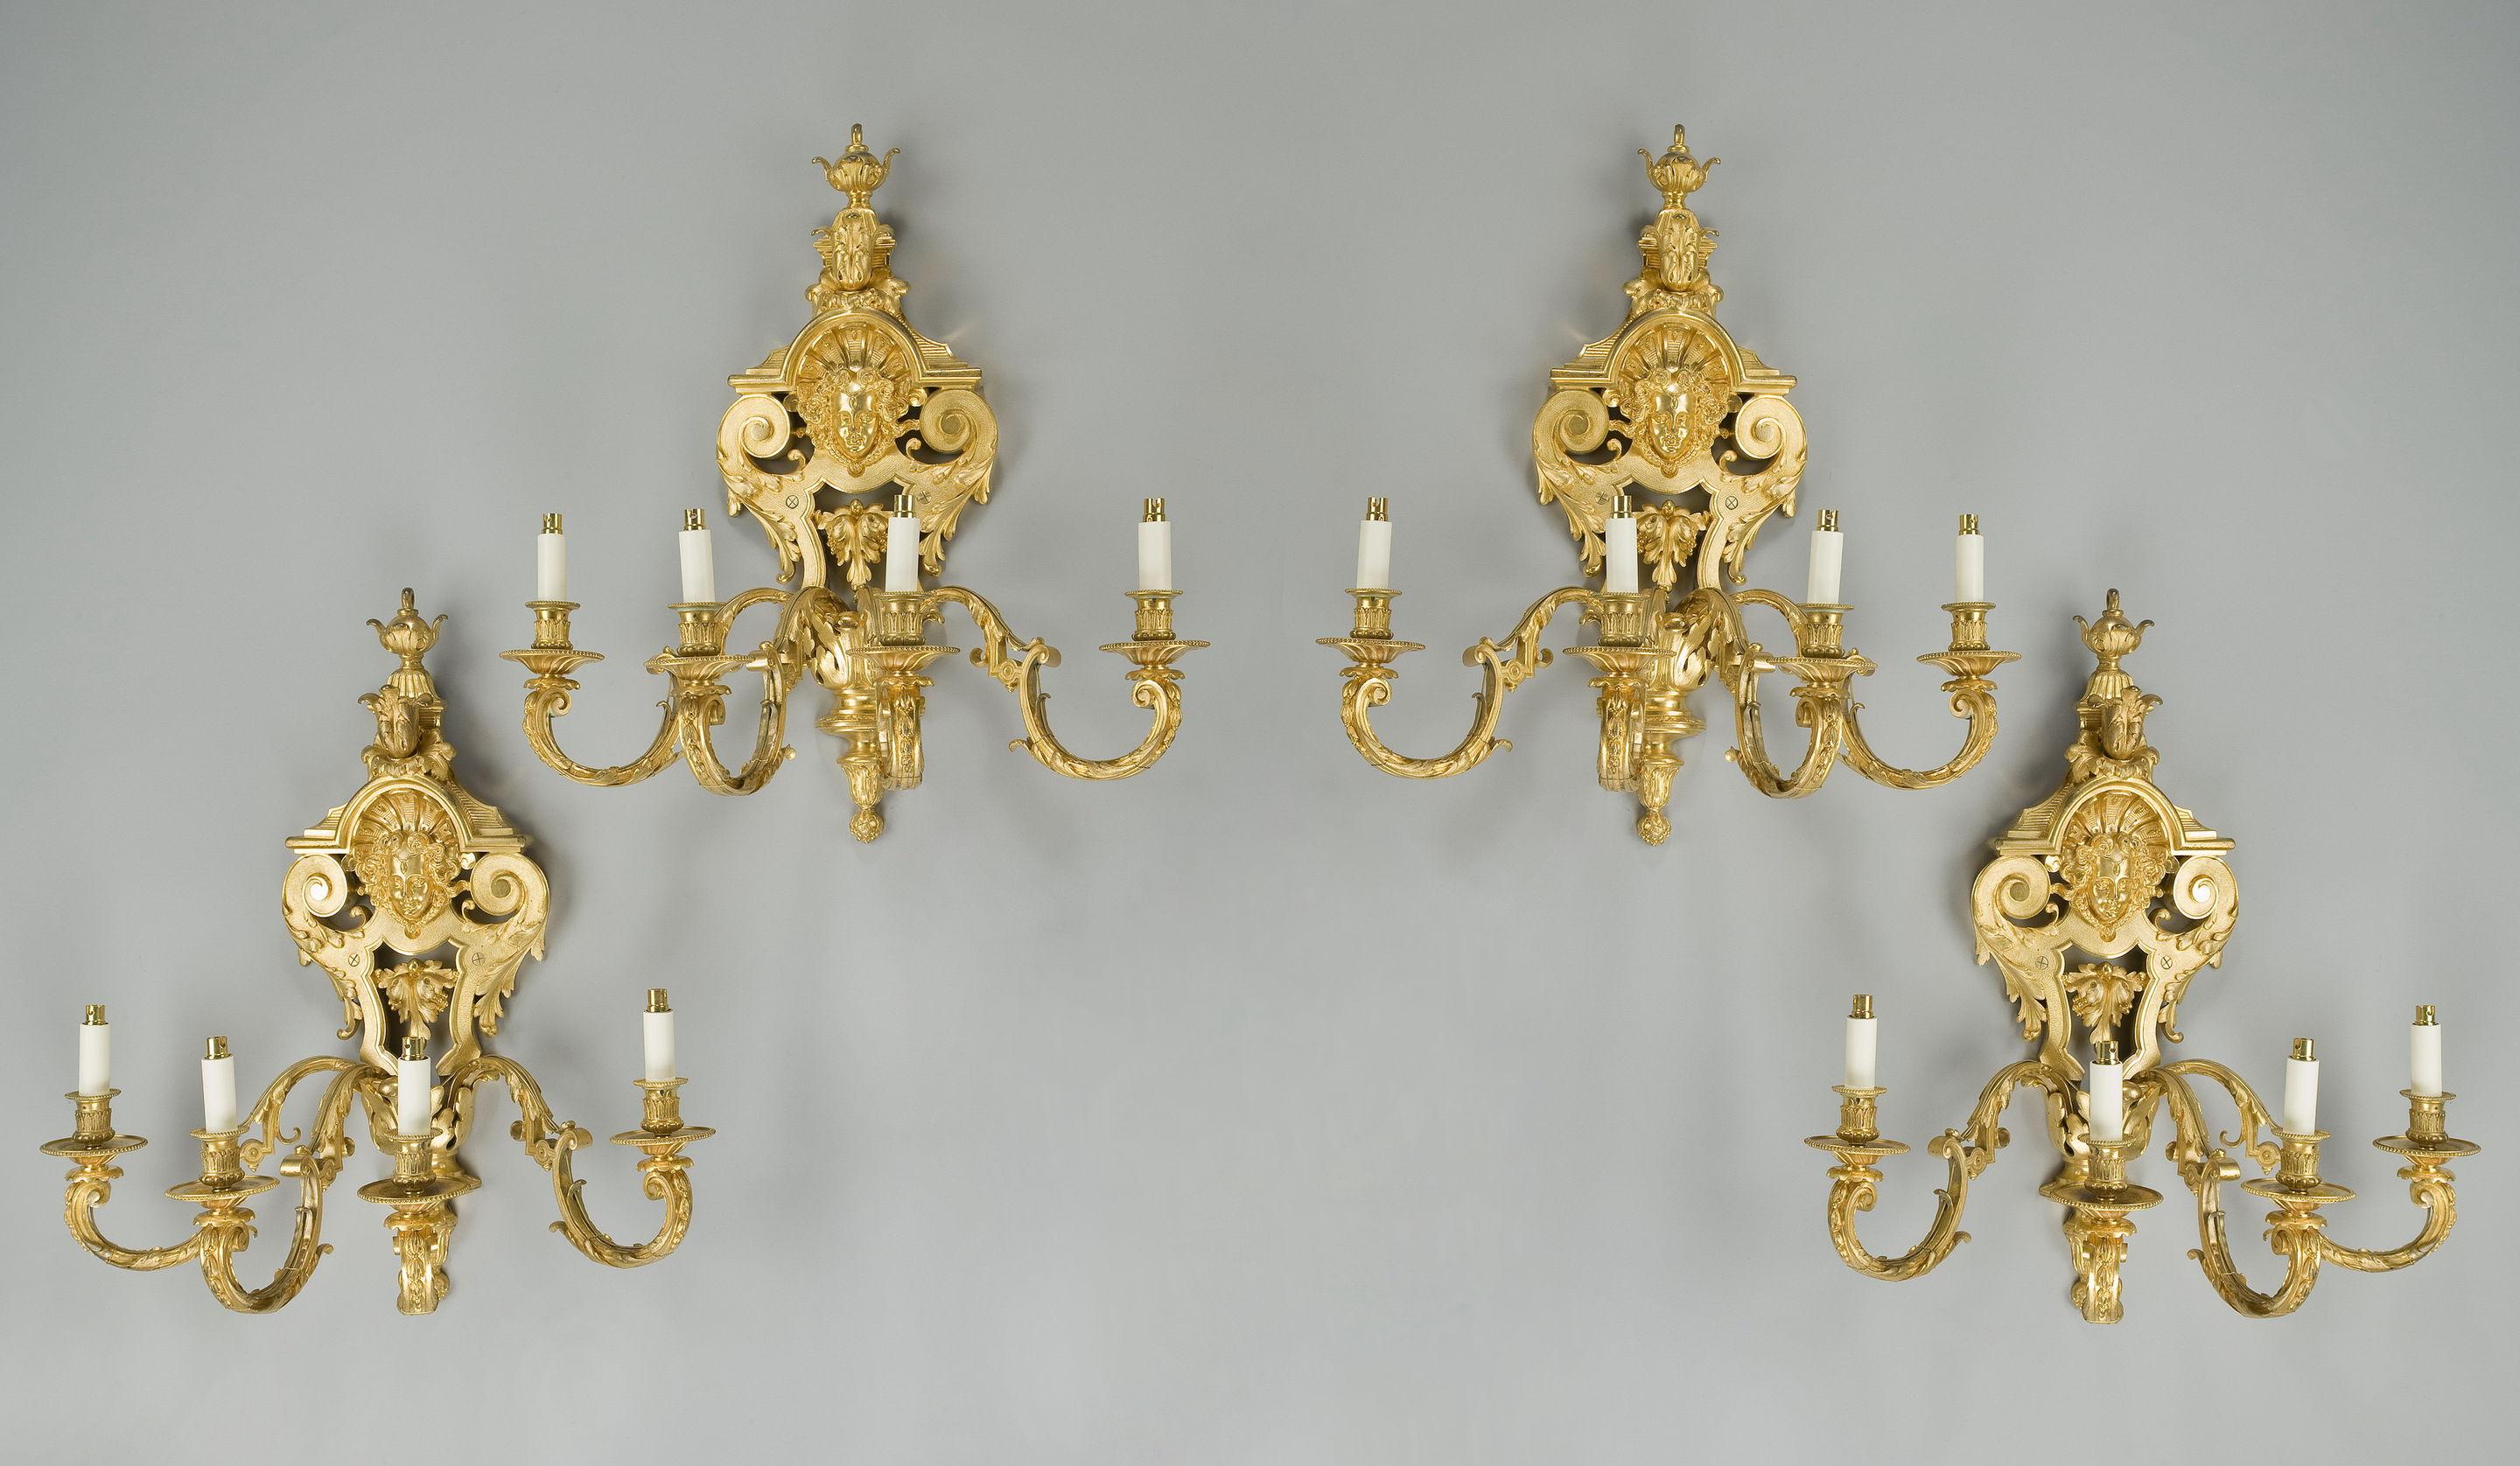 French Antique Bronze Wall Lights Signed ‘Rode a Paris’, circa 1890 For Sale 1